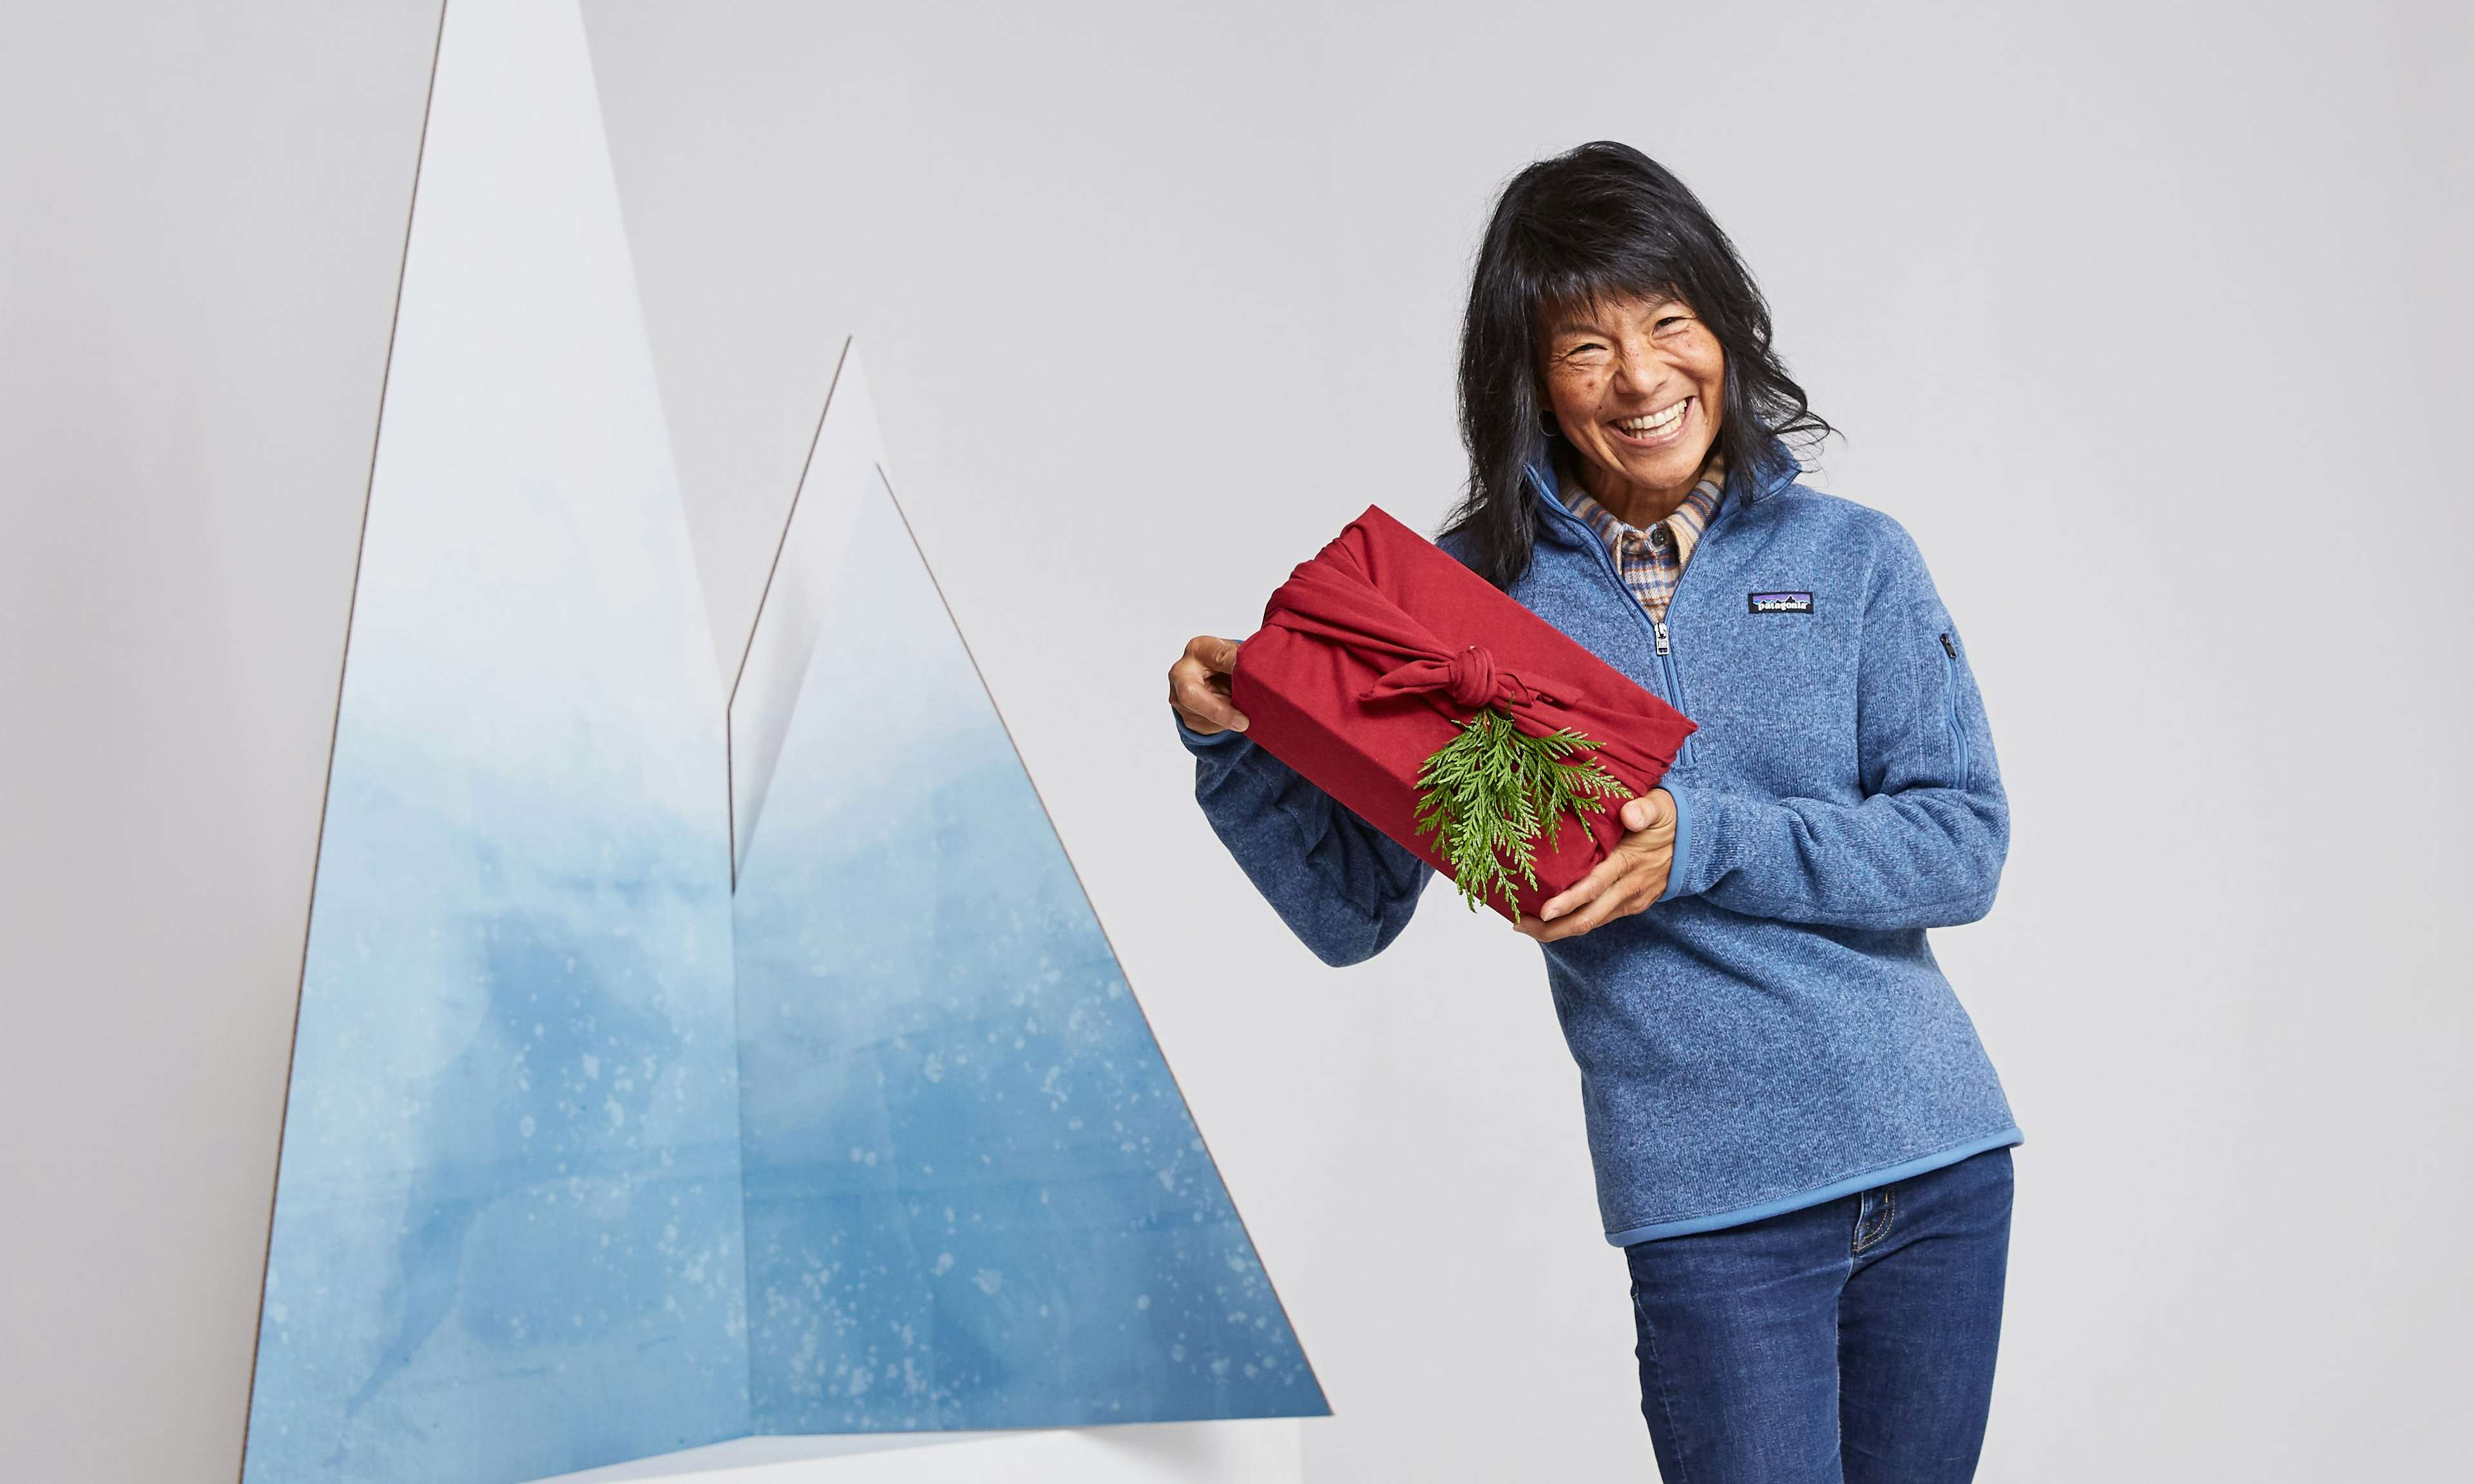 Person holding a present wrapped in fabric with fallen greenery